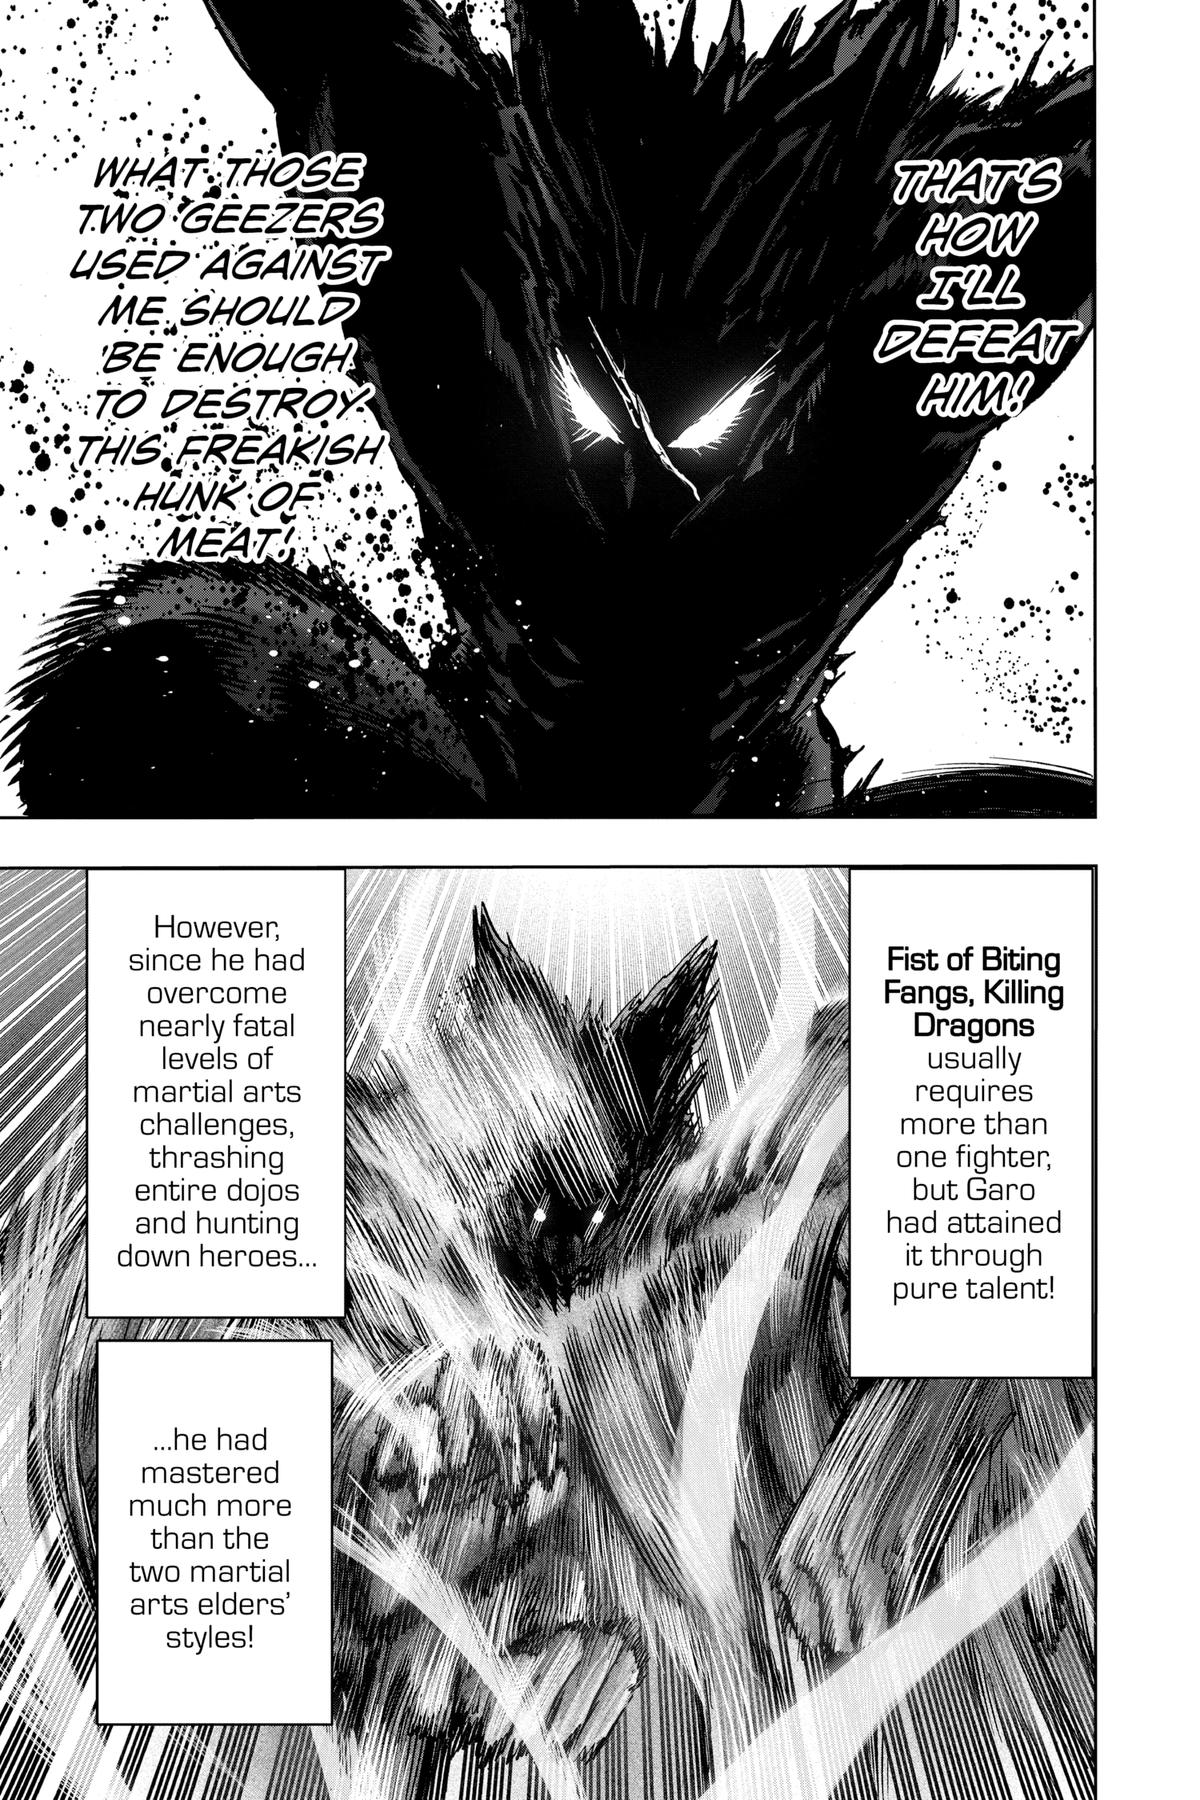 One-Punch Man, Punch 130 image 31